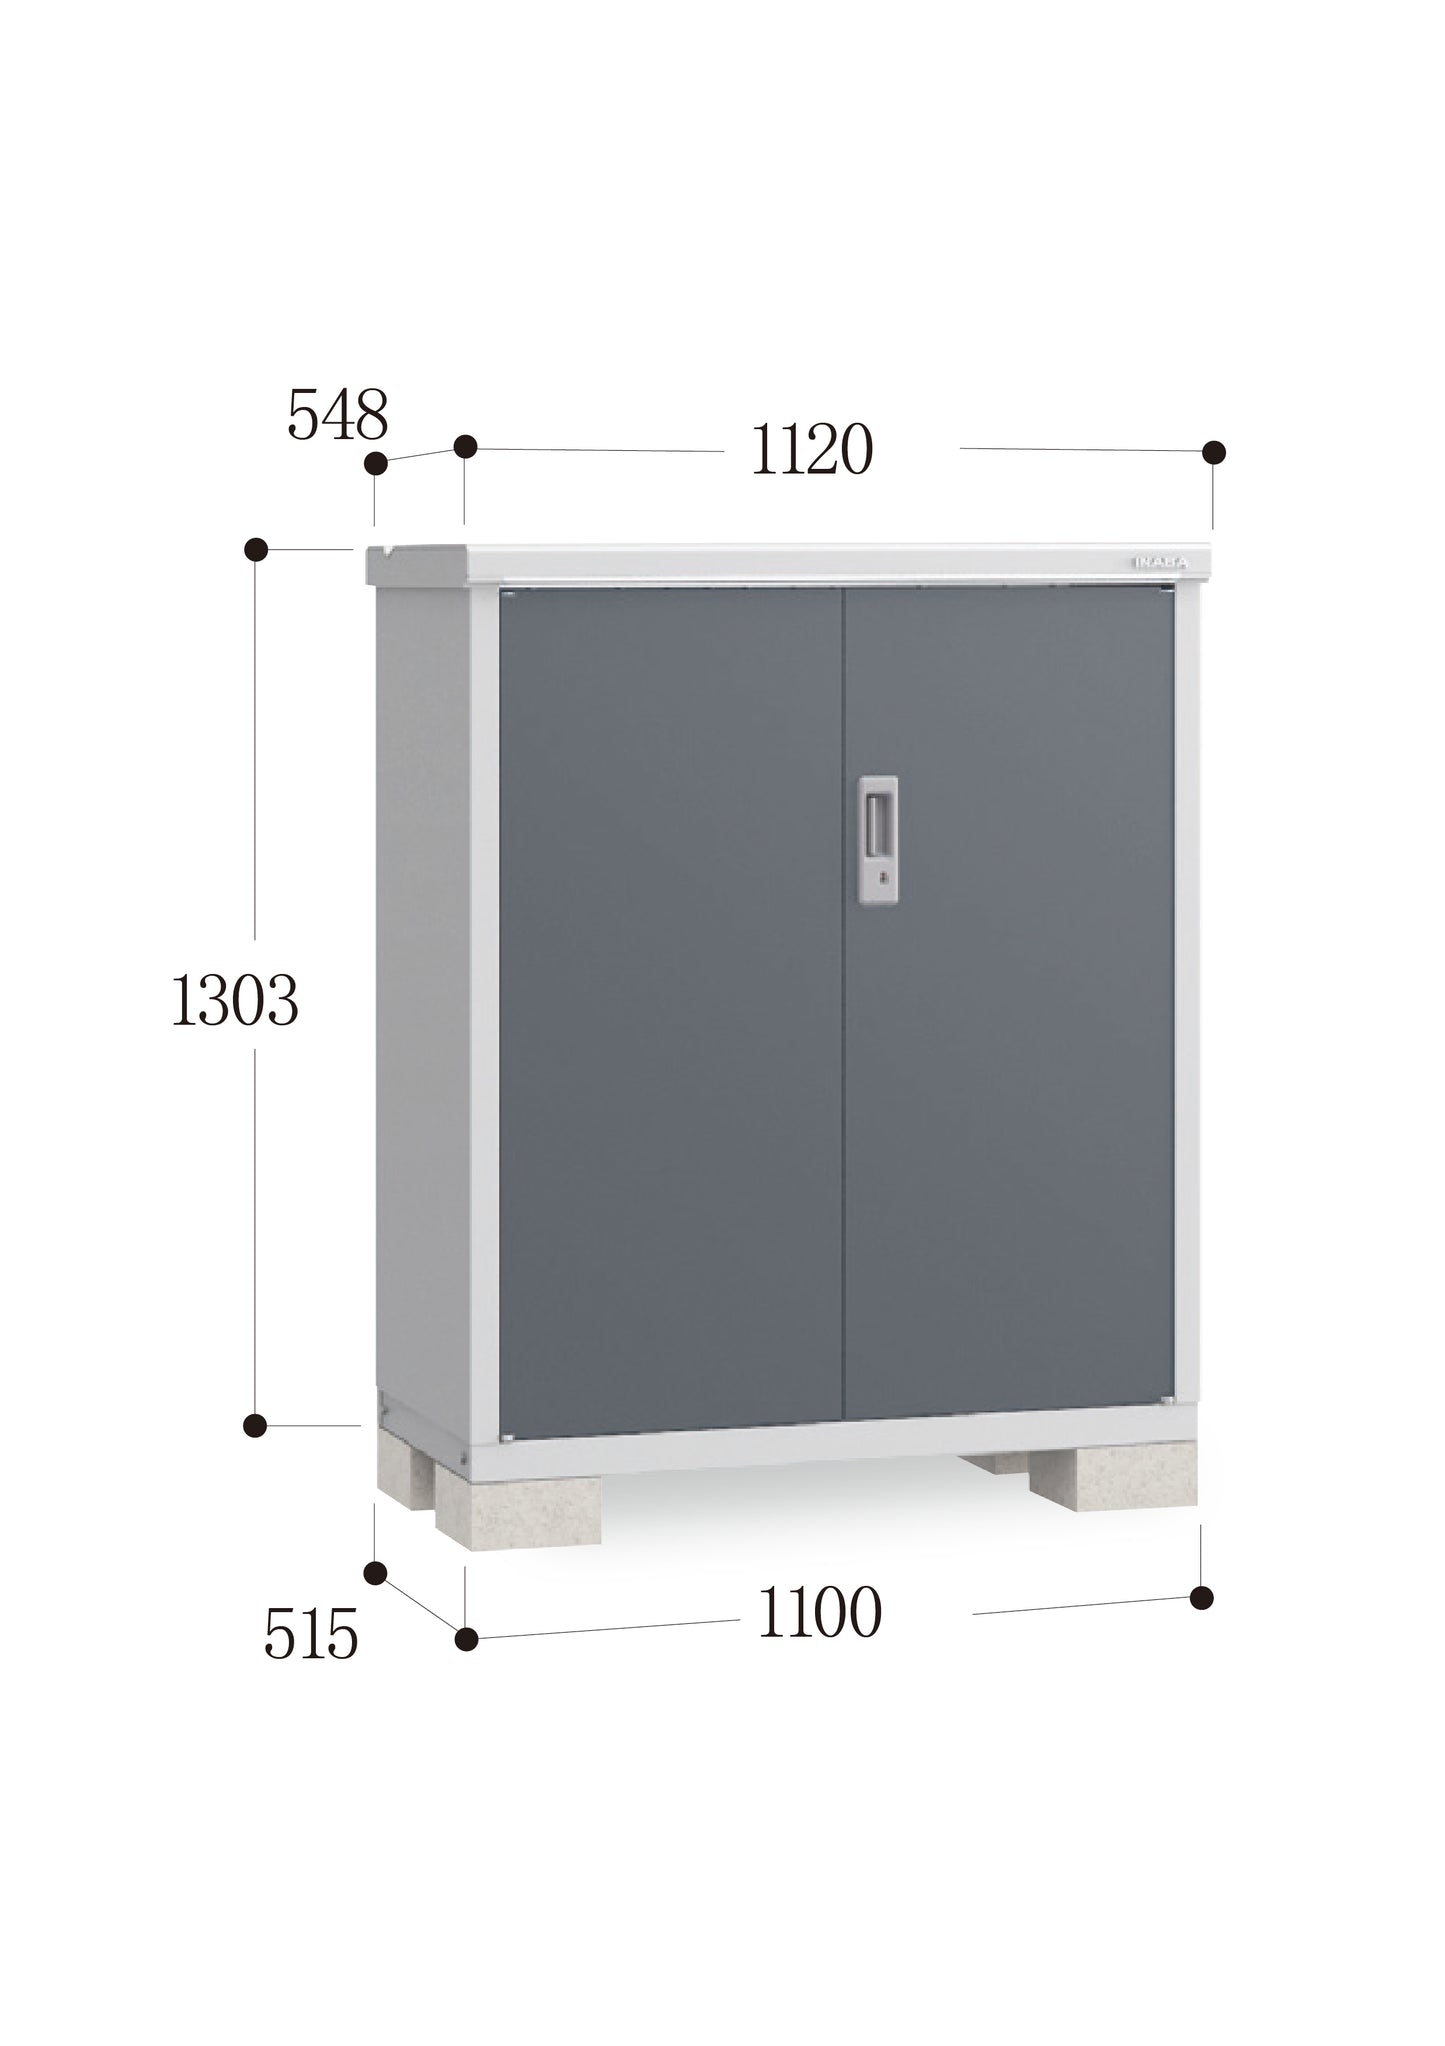 *Pre-order* Inaba Outdoor Storage BJX-115C (W1120XD548XH1303mm)0.8m3